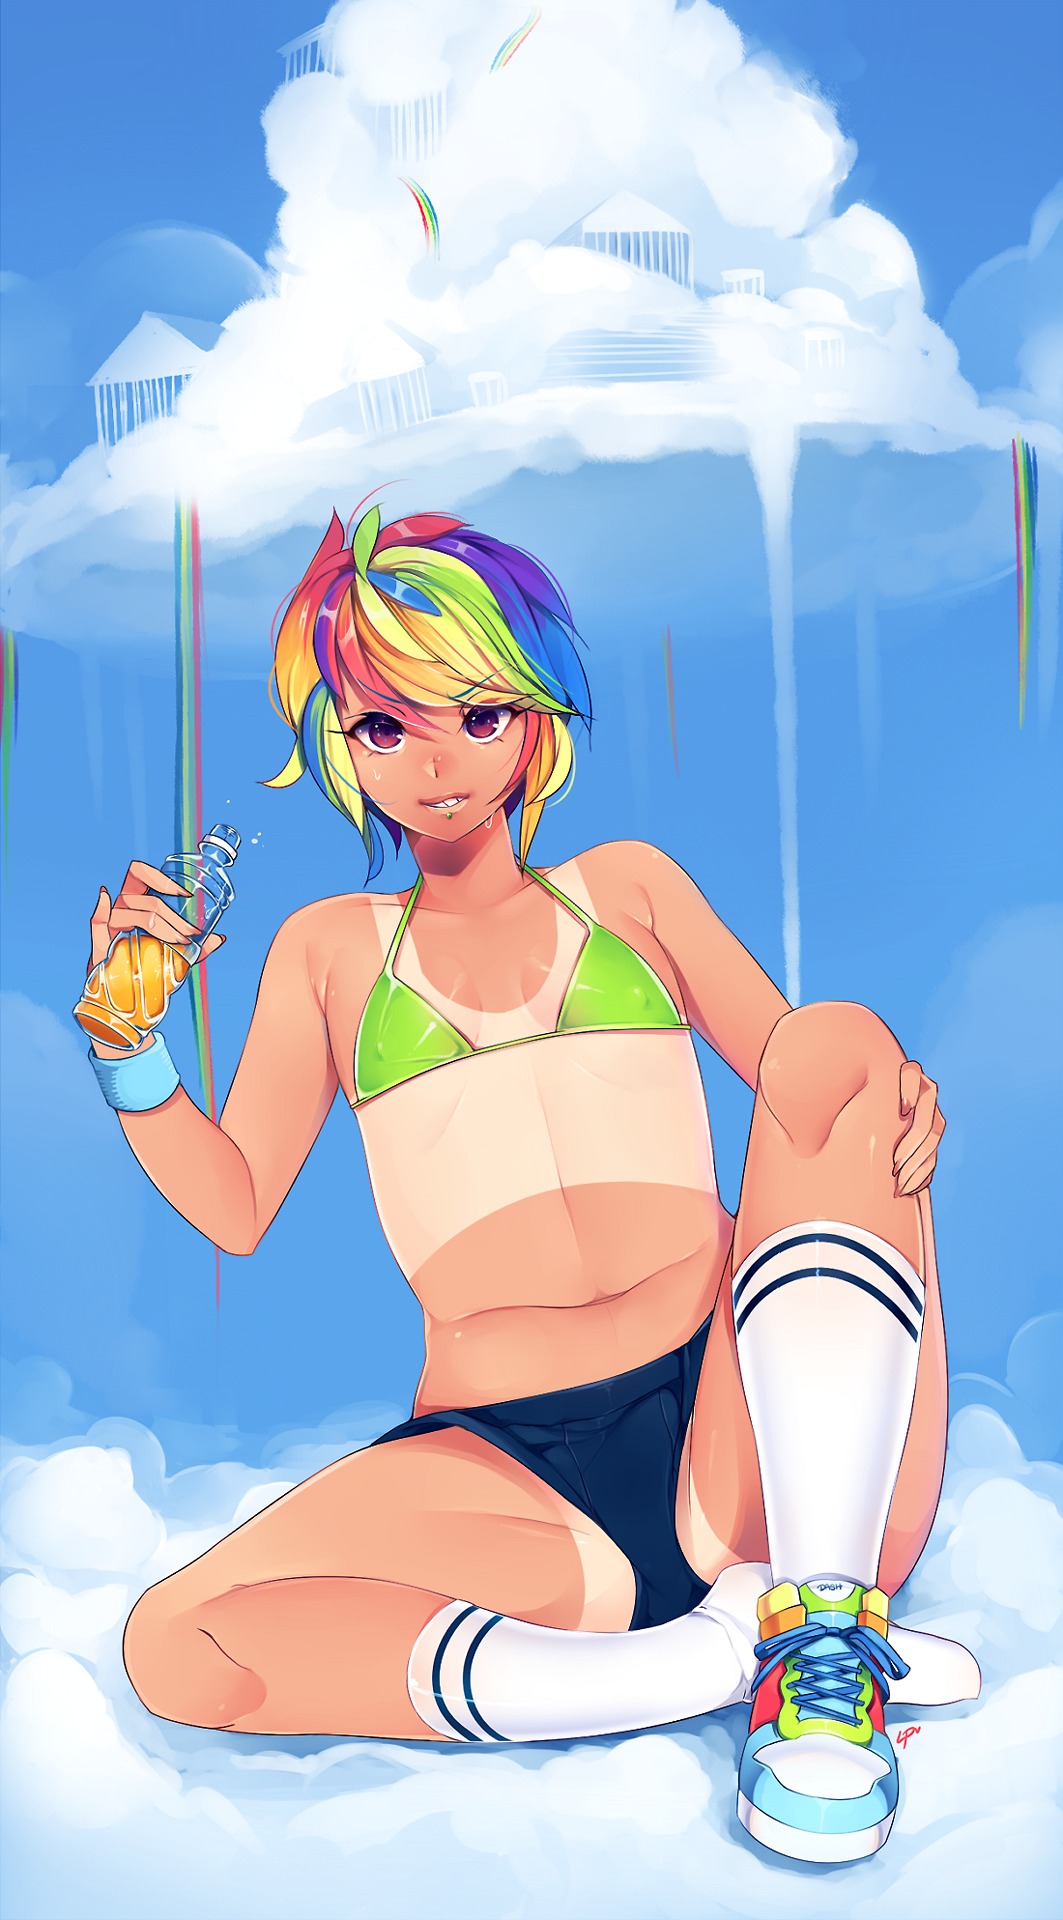 1girl bikini_top bottle clouds flat_chest highres loyproject my_little_pony my_little_pony_friendship_is_magic personification pink_eyes pinky_out rainbow_dash rainbow_hair shoes short_hair short_shorts shorts single_shoe sitting smile sneakers socks solo tan tanline wristband